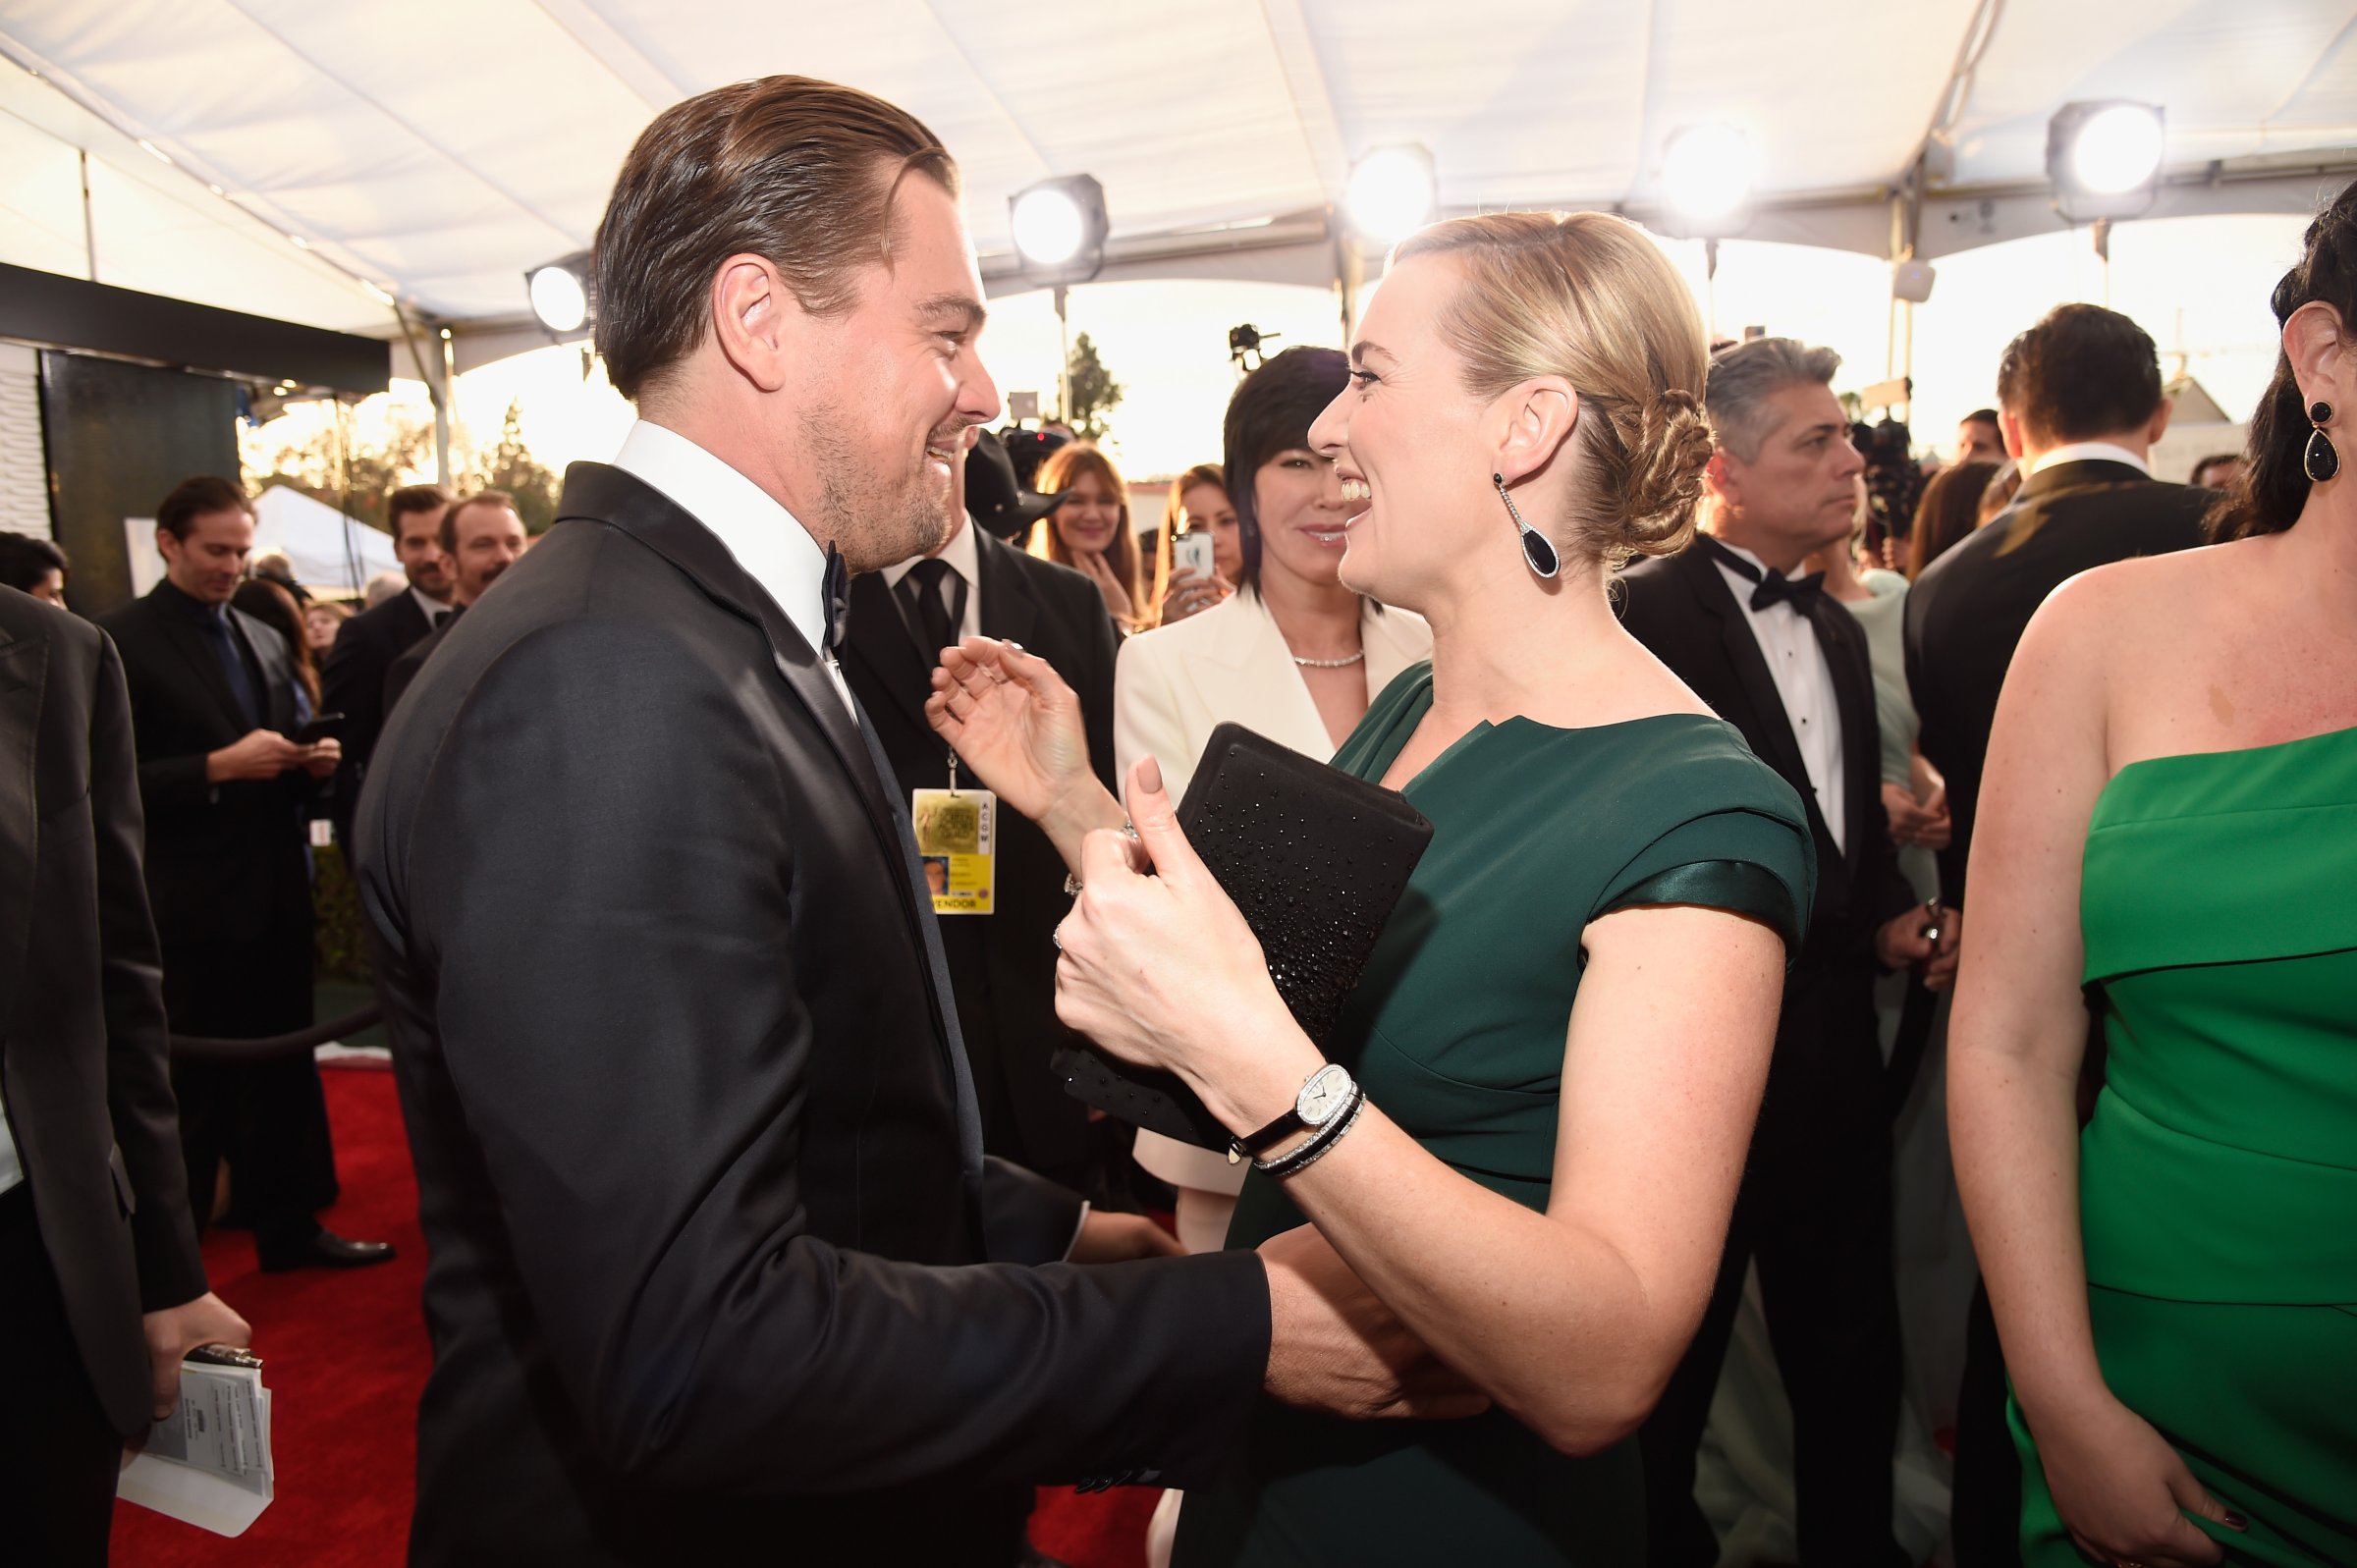 Leonardo DiCaprio and Kate Winslet attend The 22nd Annual Screen Actors Guild Awards on Jan. 30, 2016 in Los Angeles.